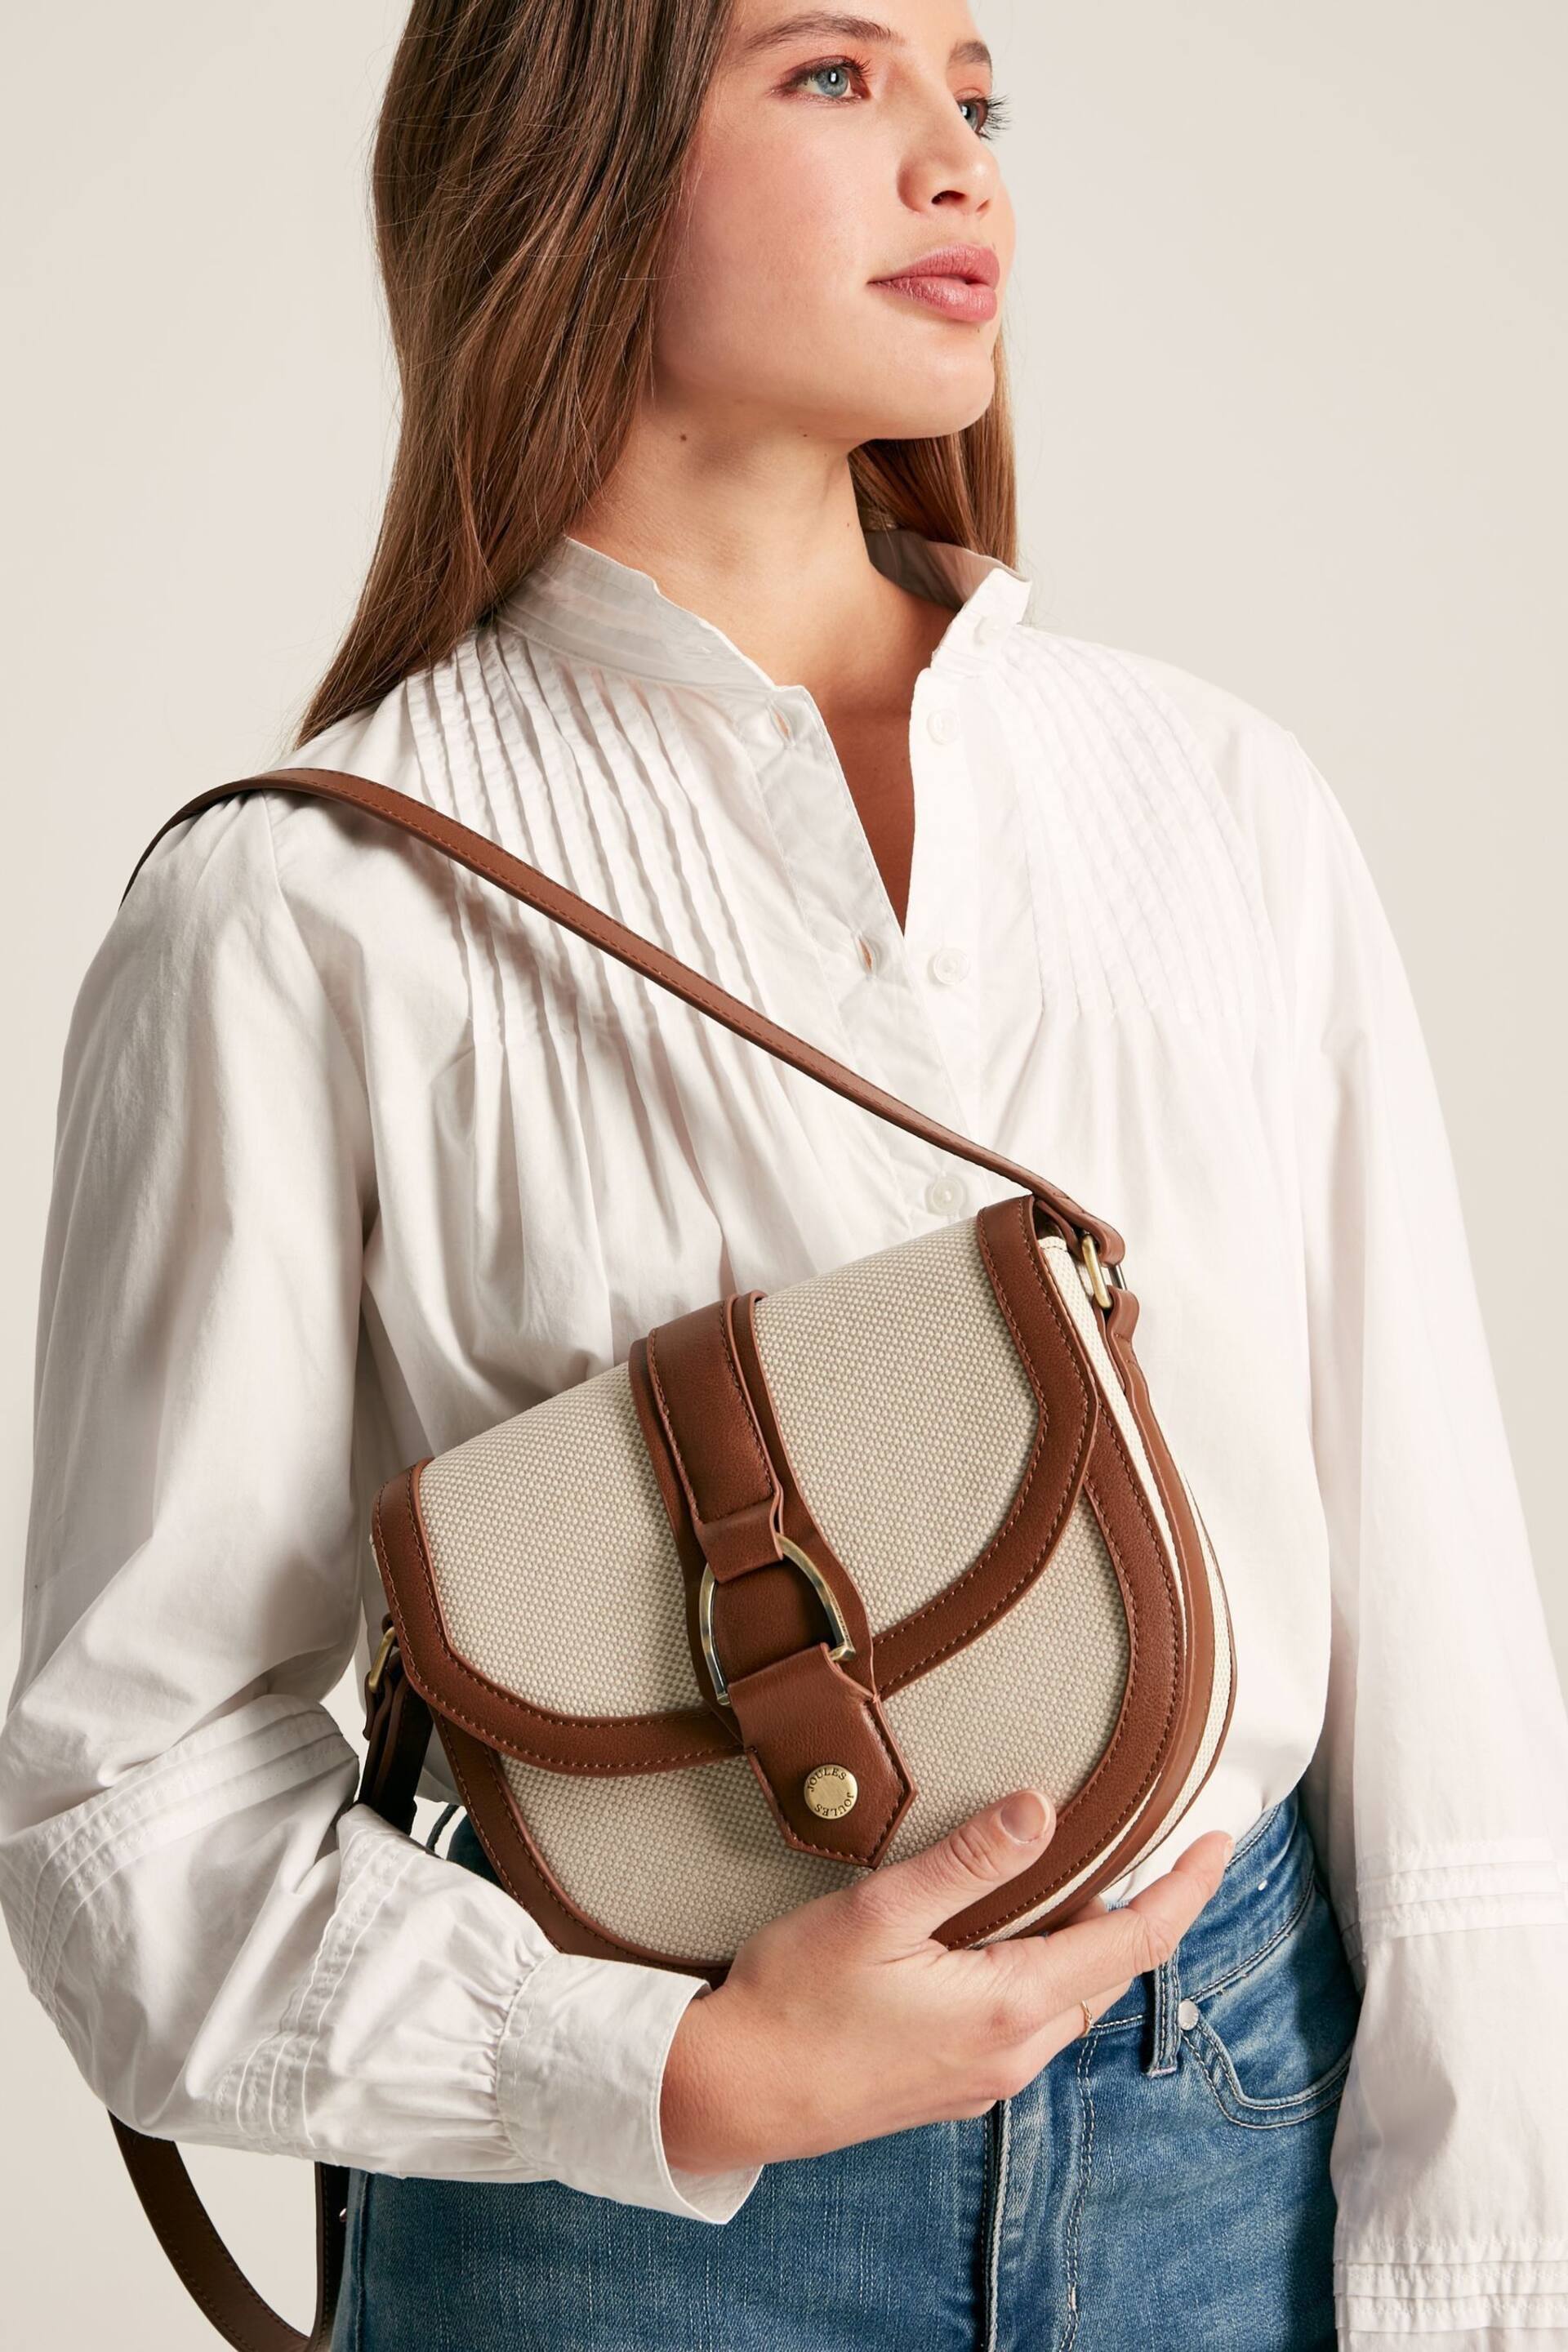 Joules Ludlow Tan Canvas Cross Body Bag - Image 2 of 9